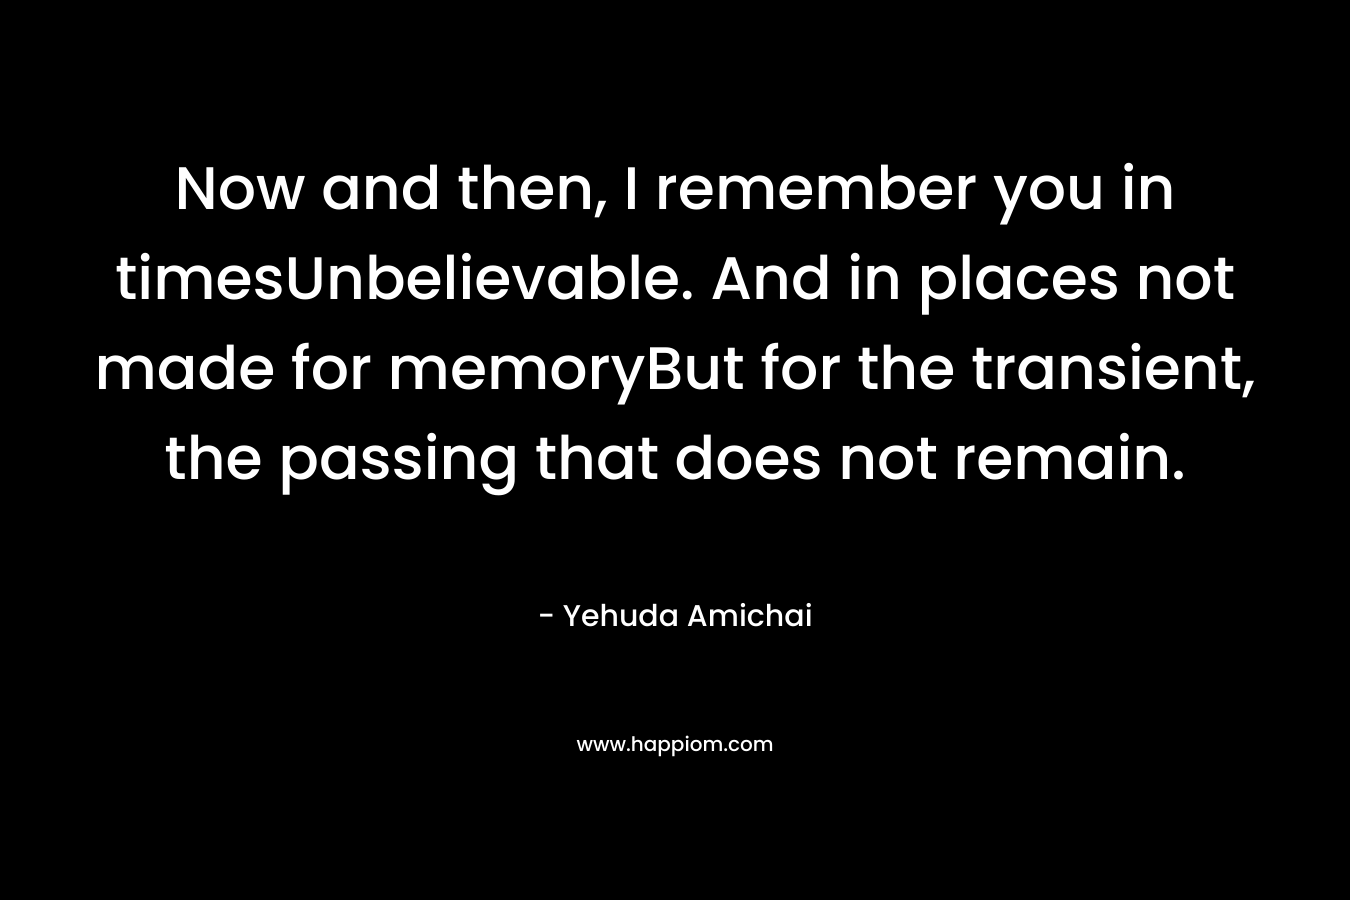 Now and then, I remember you in timesUnbelievable. And in places not made for memoryBut for the transient, the passing that does not remain. – Yehuda Amichai